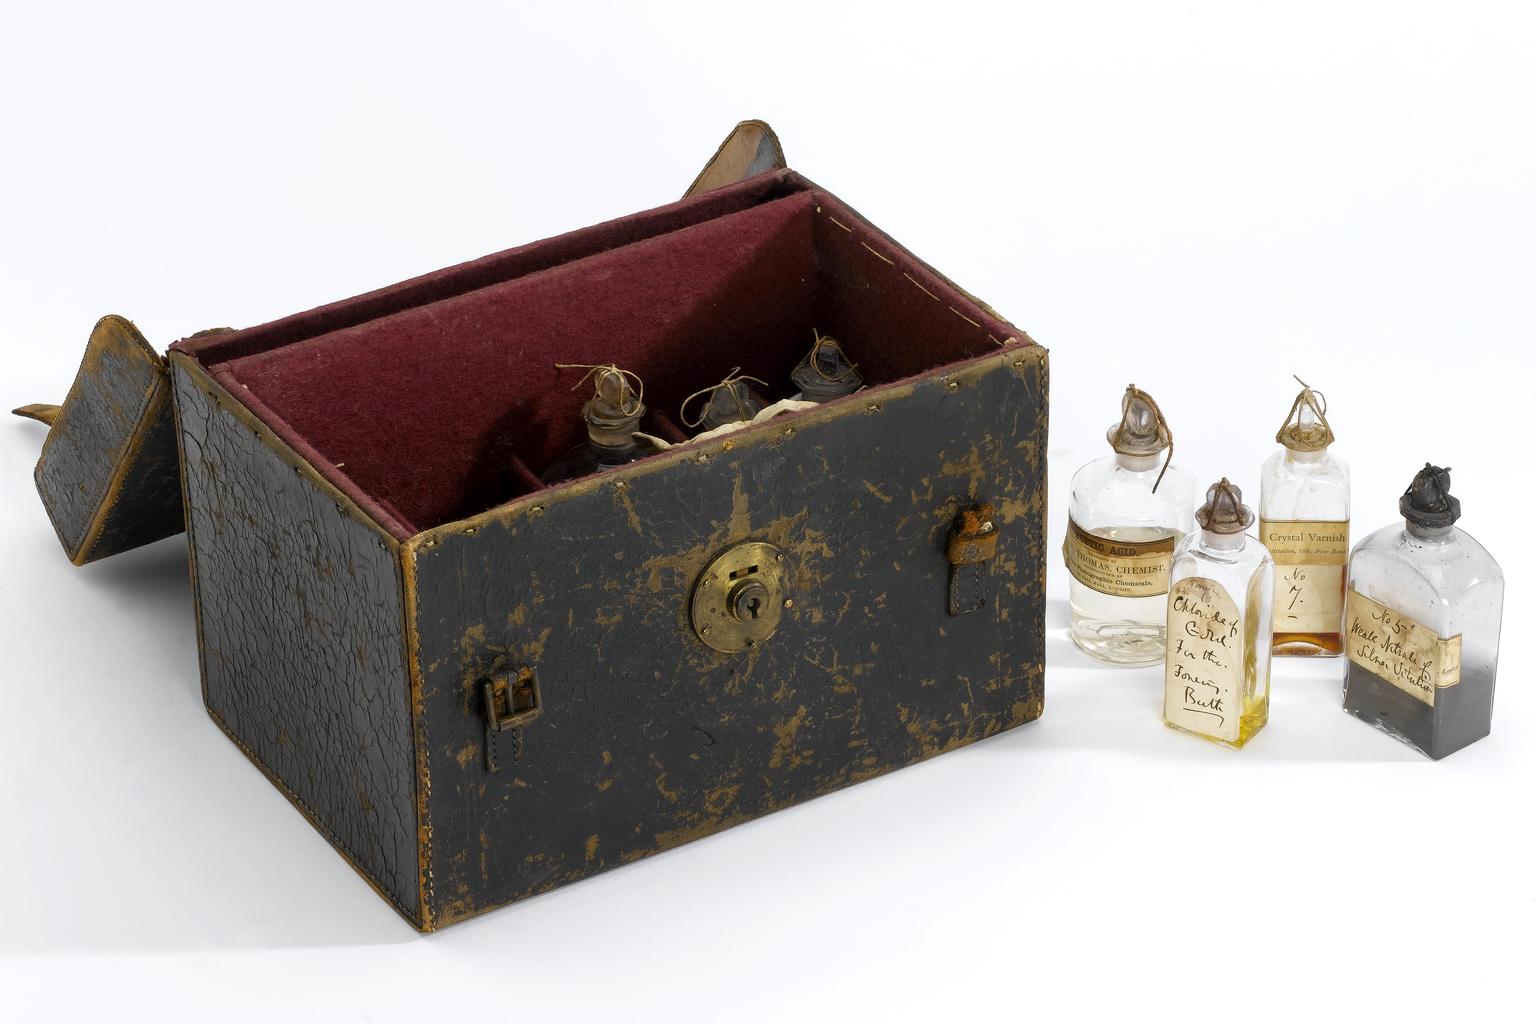 Set of chemicals for wet-plate process in 12 glass bottles in leather portable case, with two leather gloves, 1854 © Science Museum Group collection